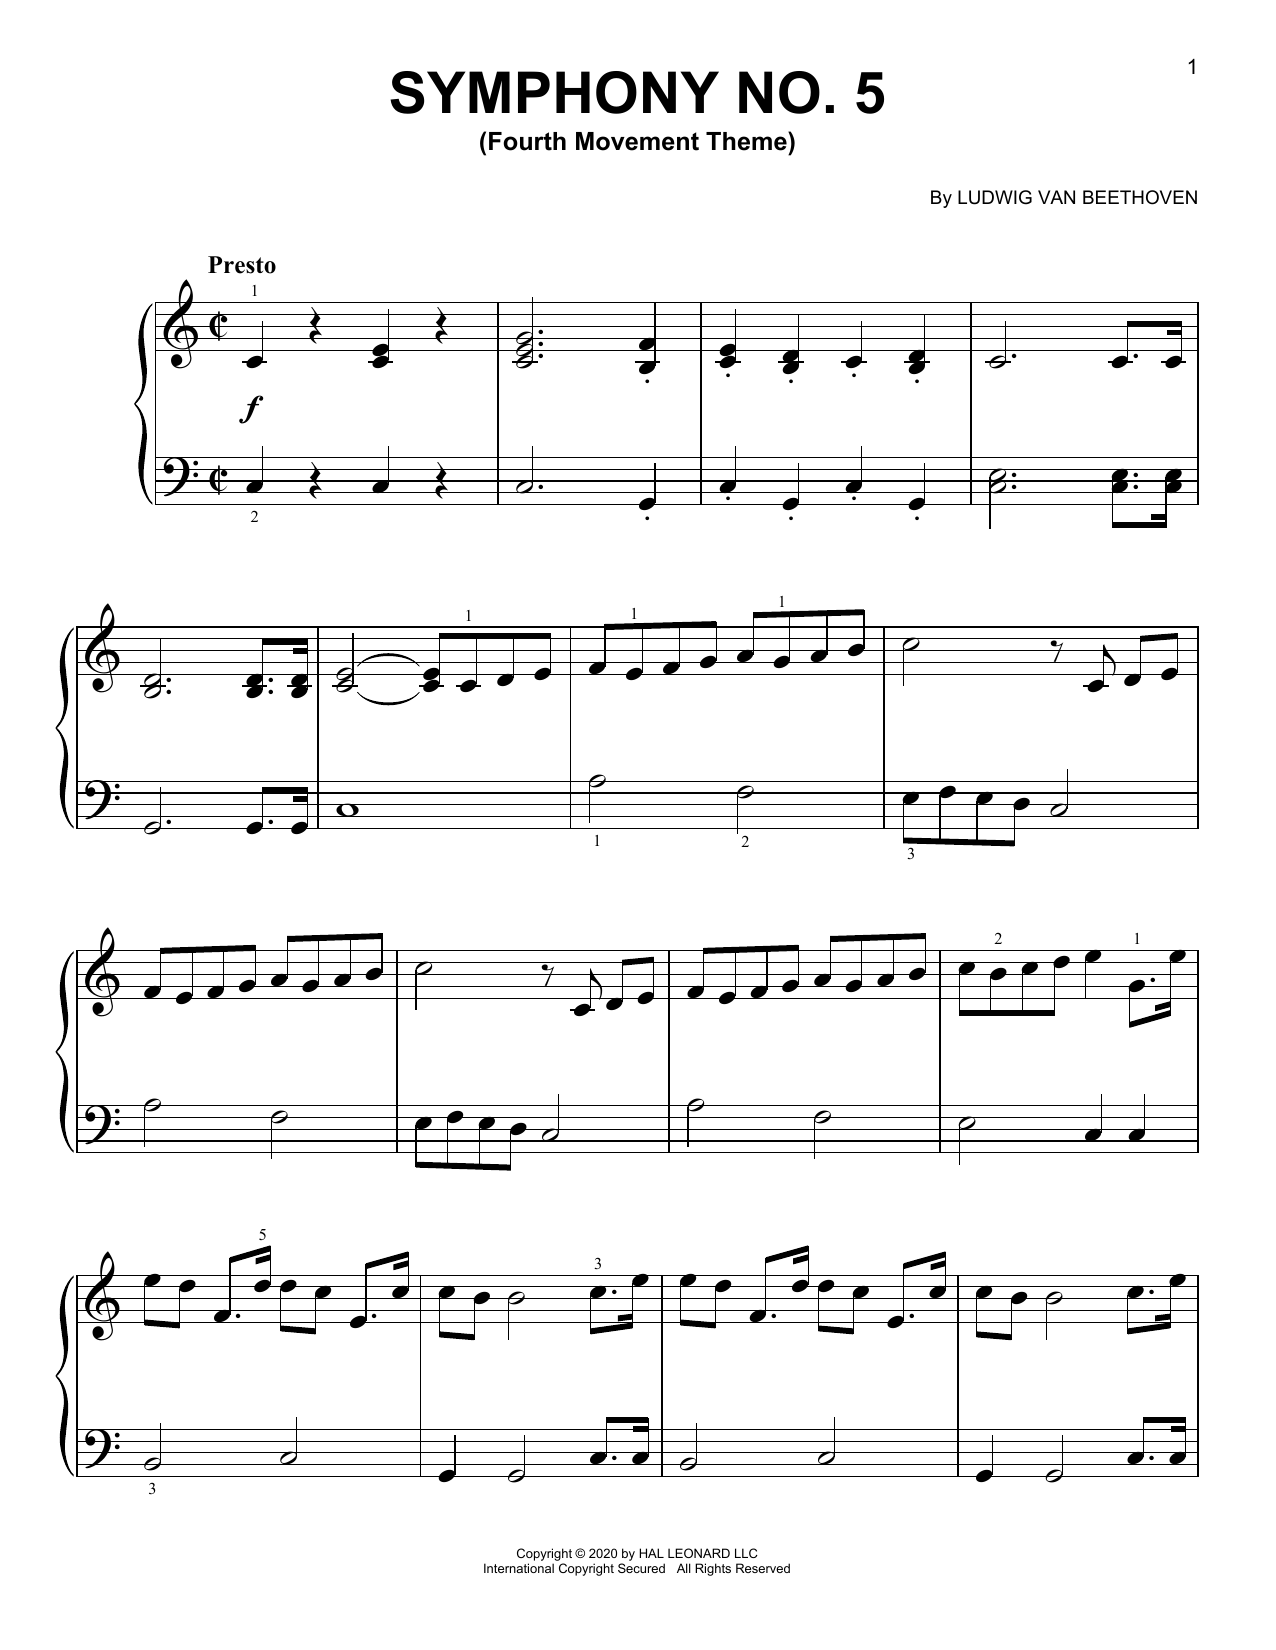 Ludwig van Beethoven Symphony No. 5, Fourth Movement Excerpt sheet music notes printable PDF score